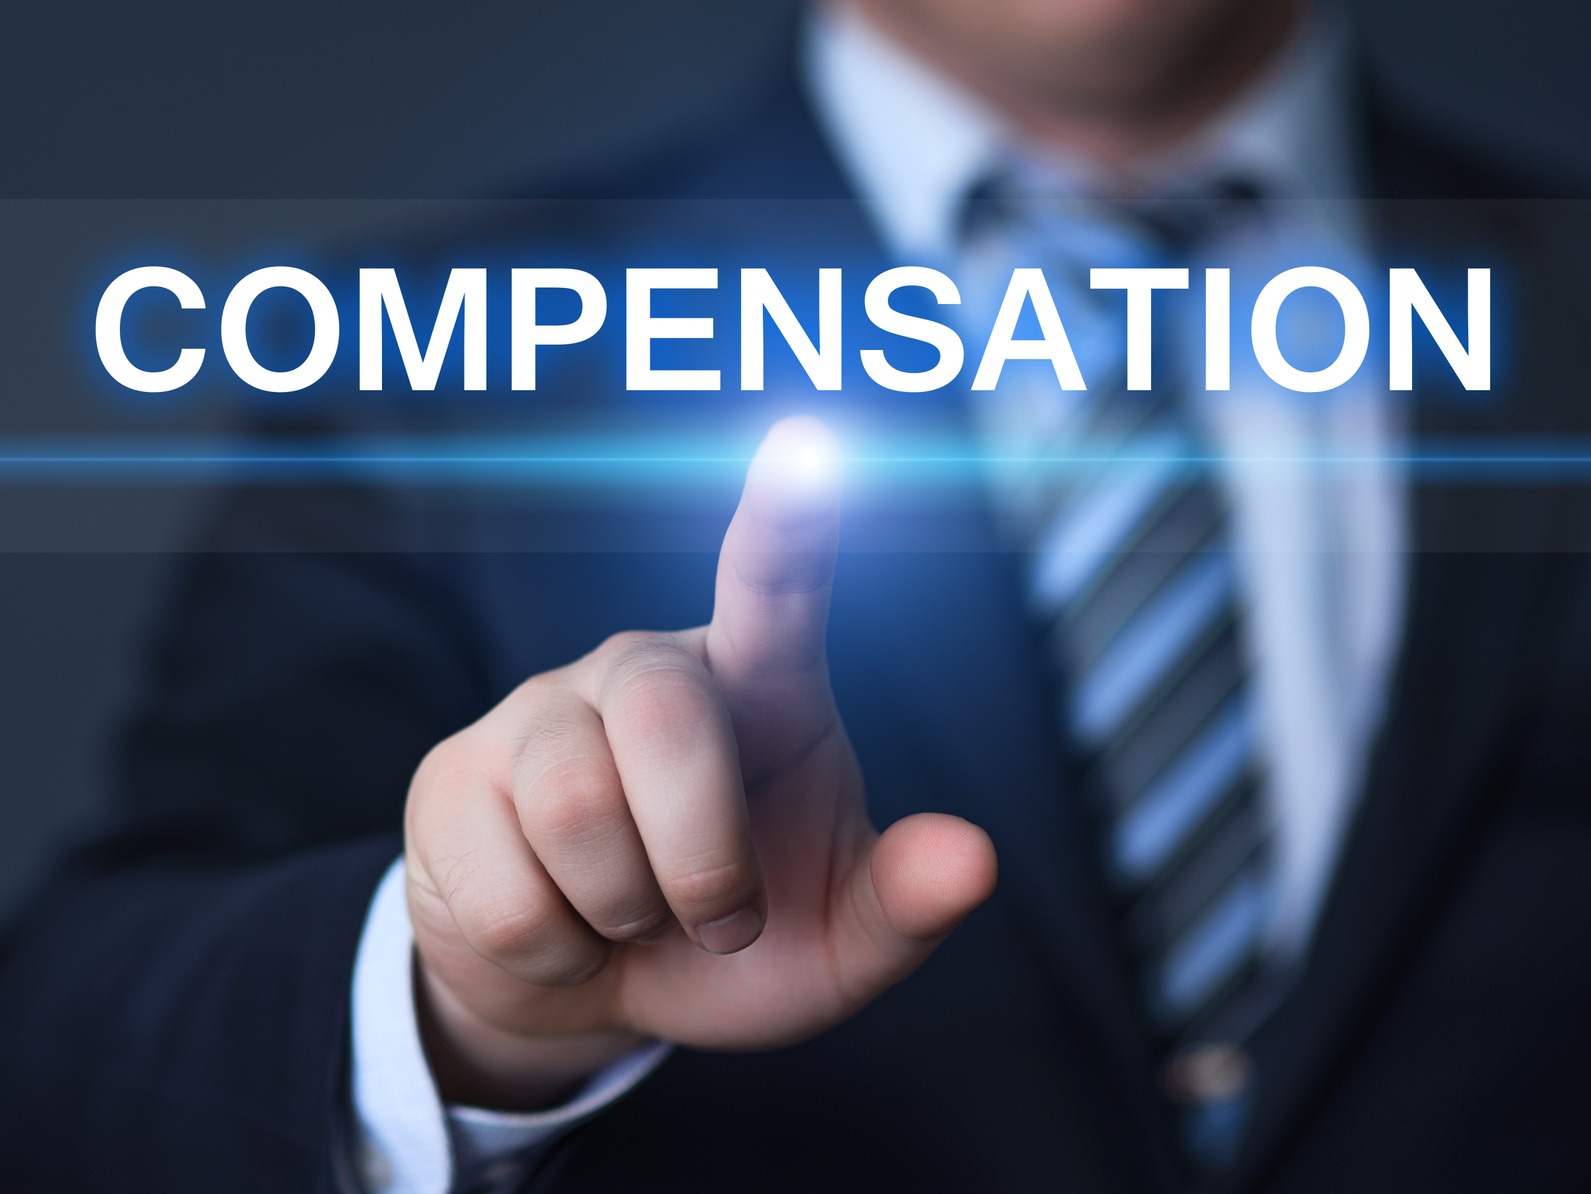 Can I Be Compensated for Lost Income After a Car Accident?